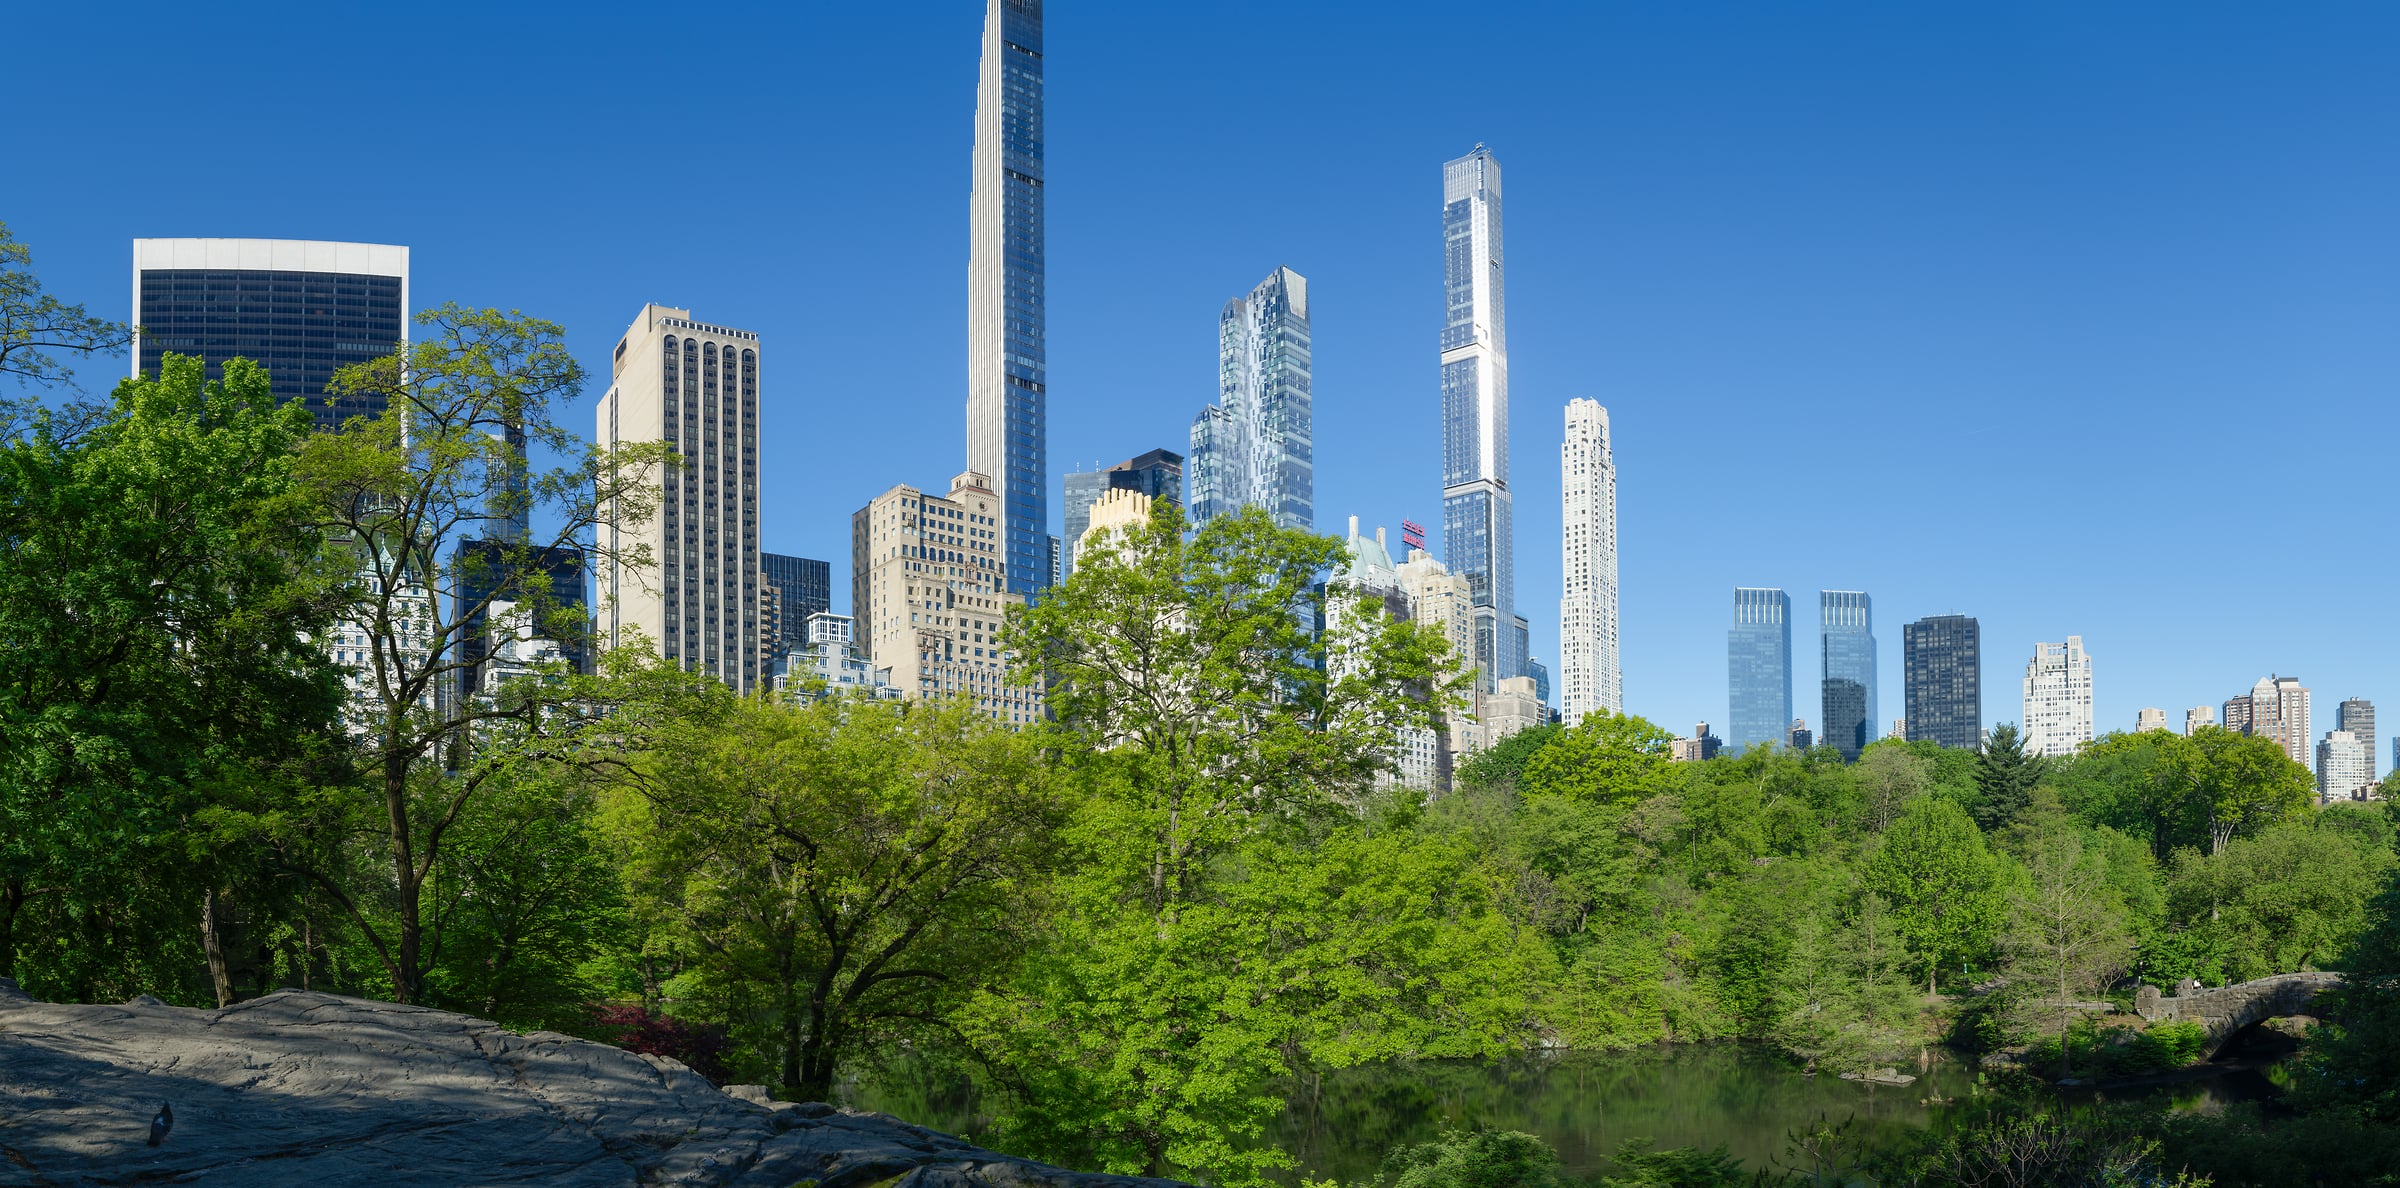 324 megapixels! A very high resolution, large-format VAST photo print of Billionaires' Row from Central Park; skyline photograph created by Greg Probst in Central Park, New York City.